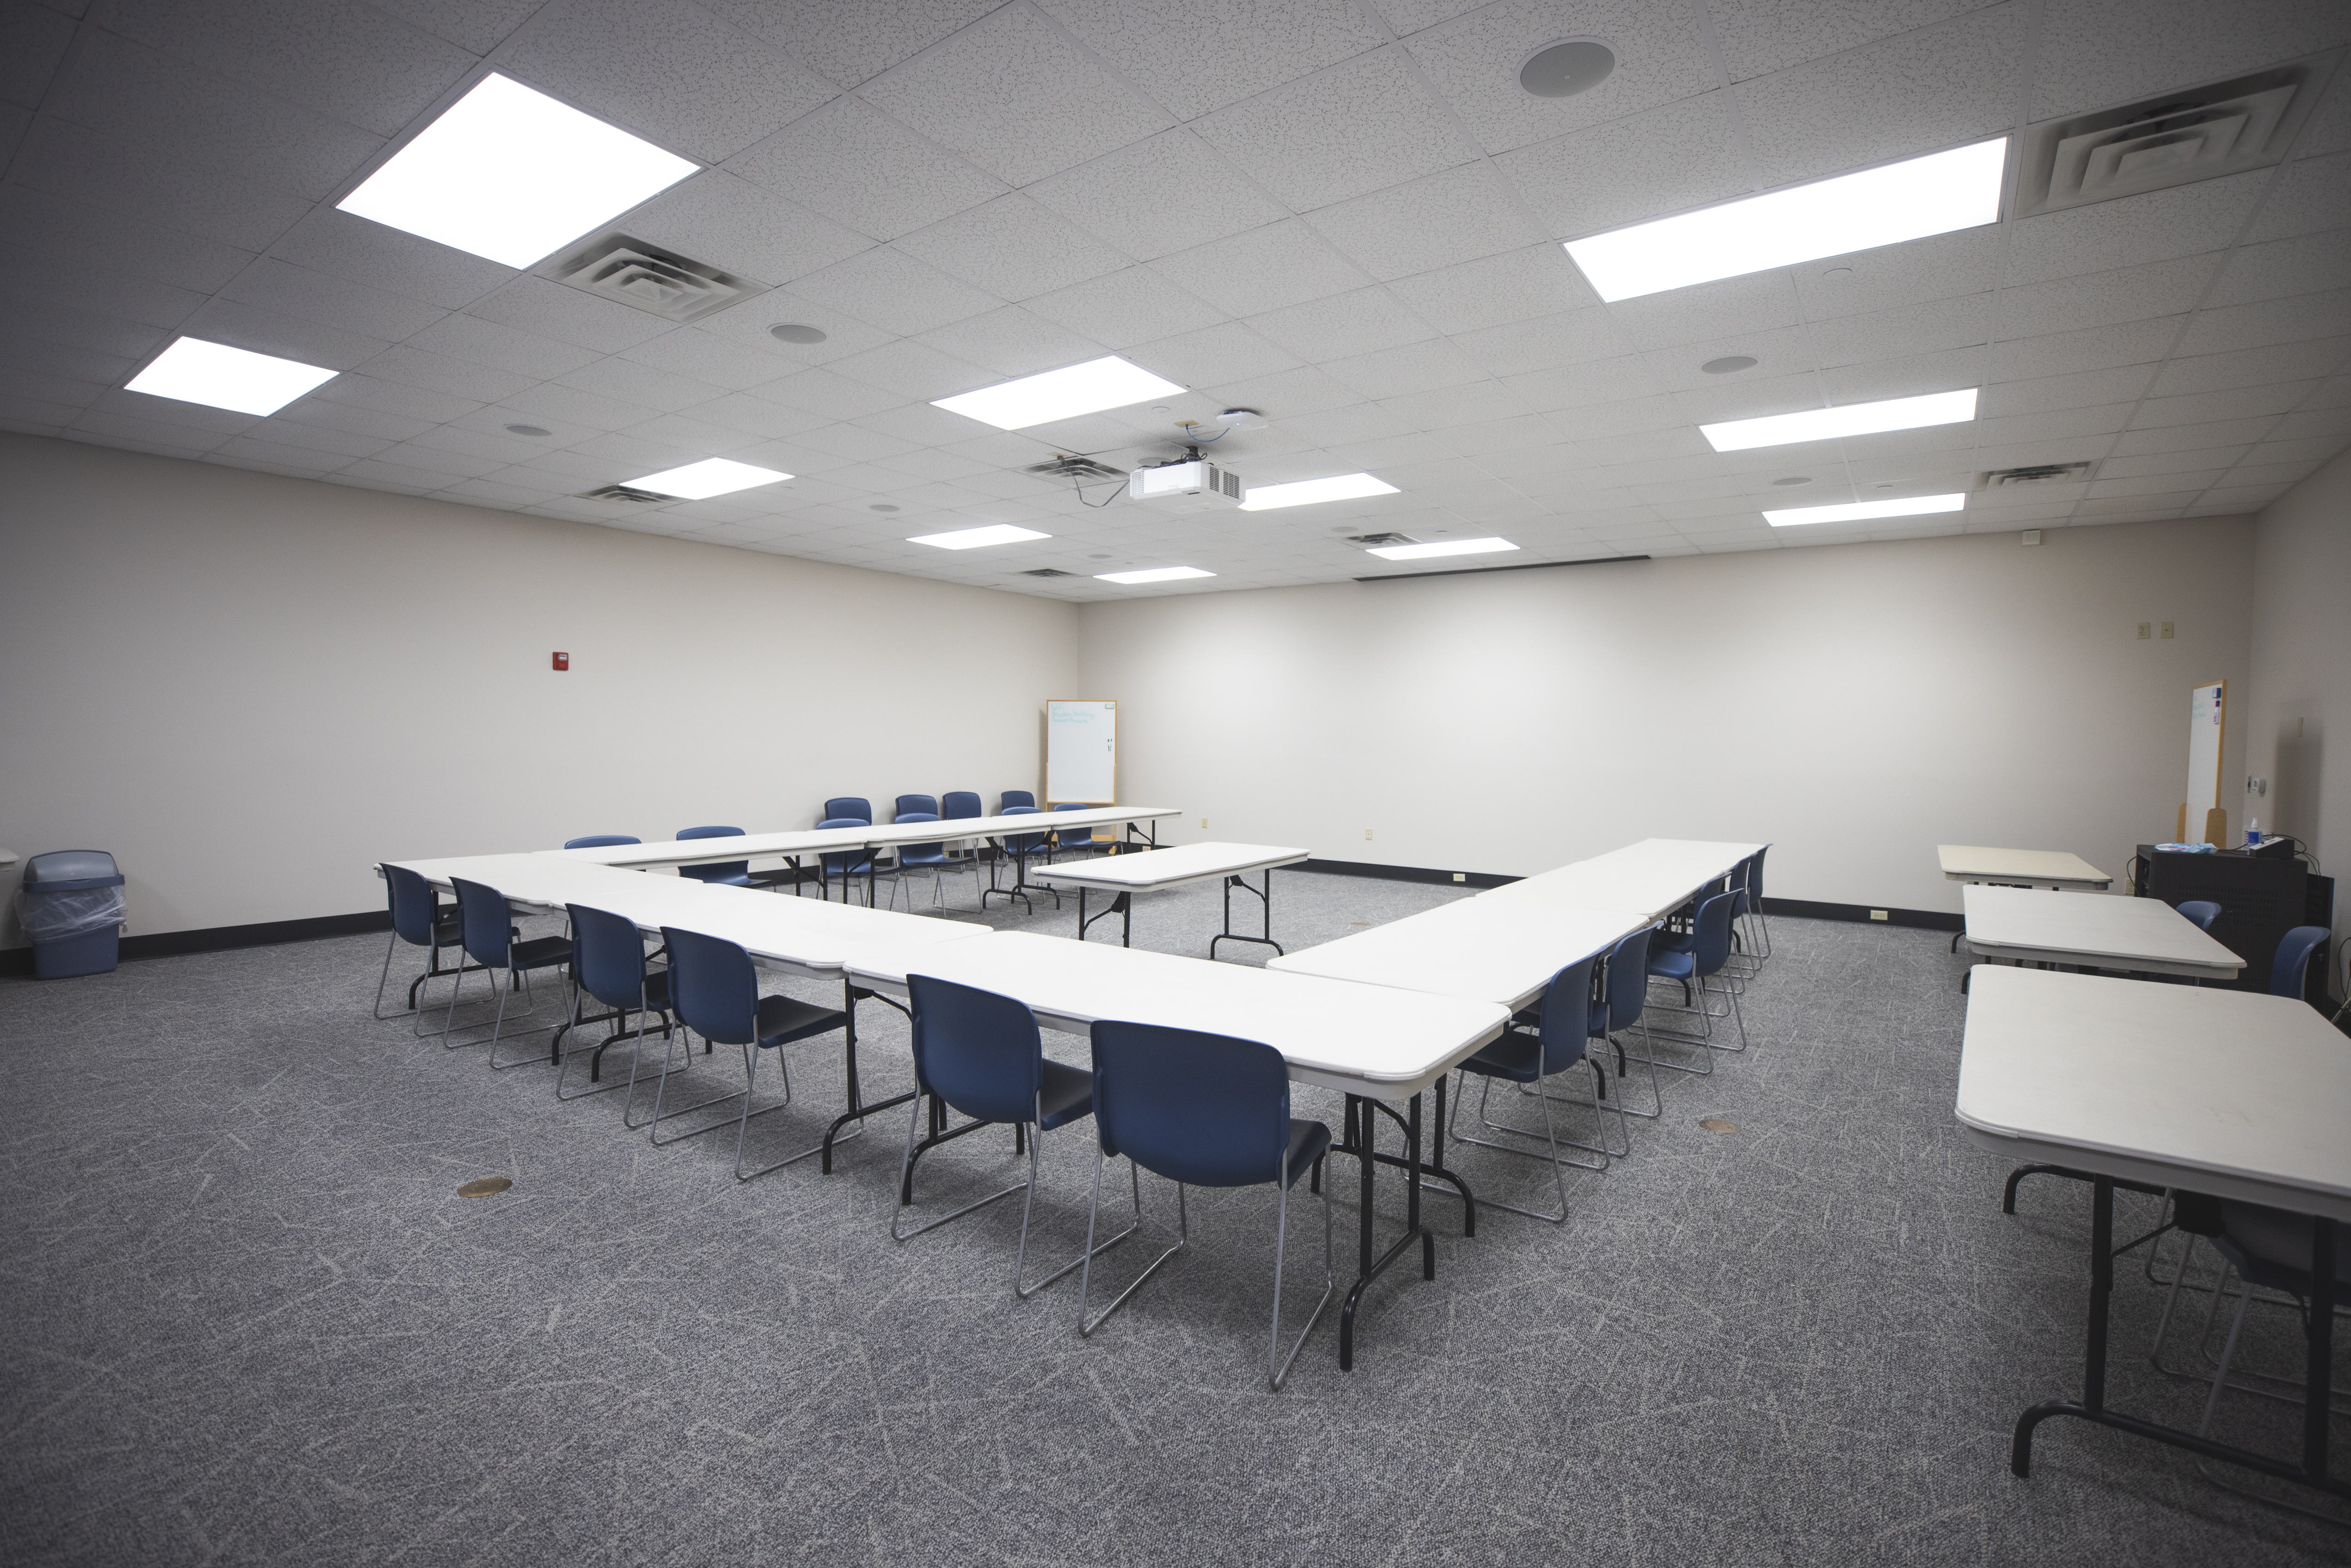 A photo of the large classroom at the Bowden Building